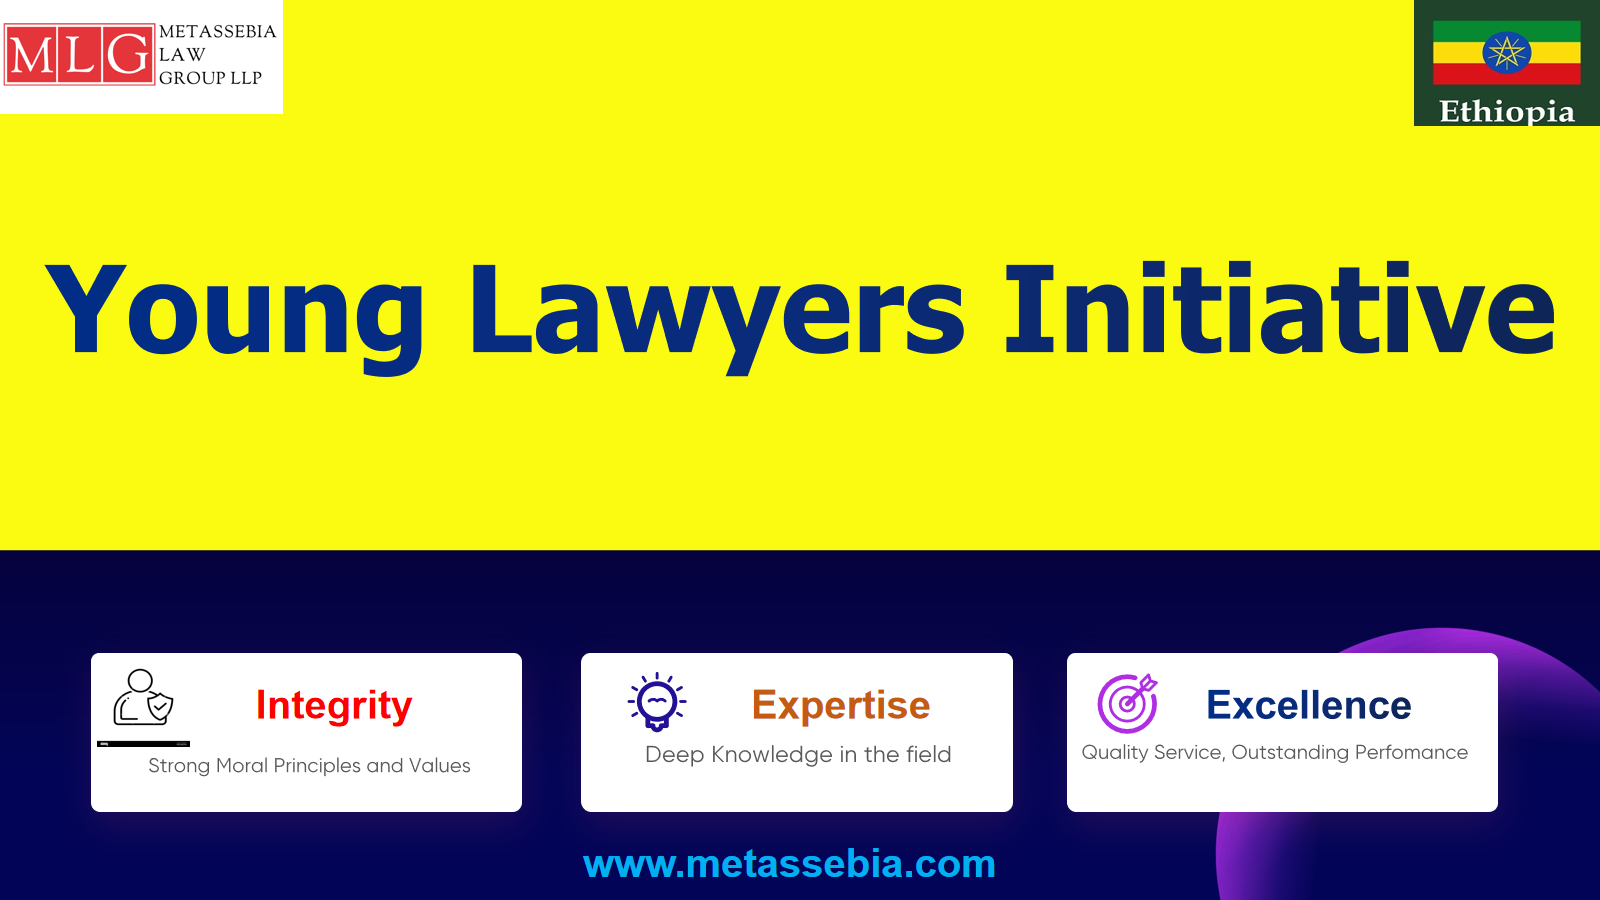 a) Young Lawyers Initiative